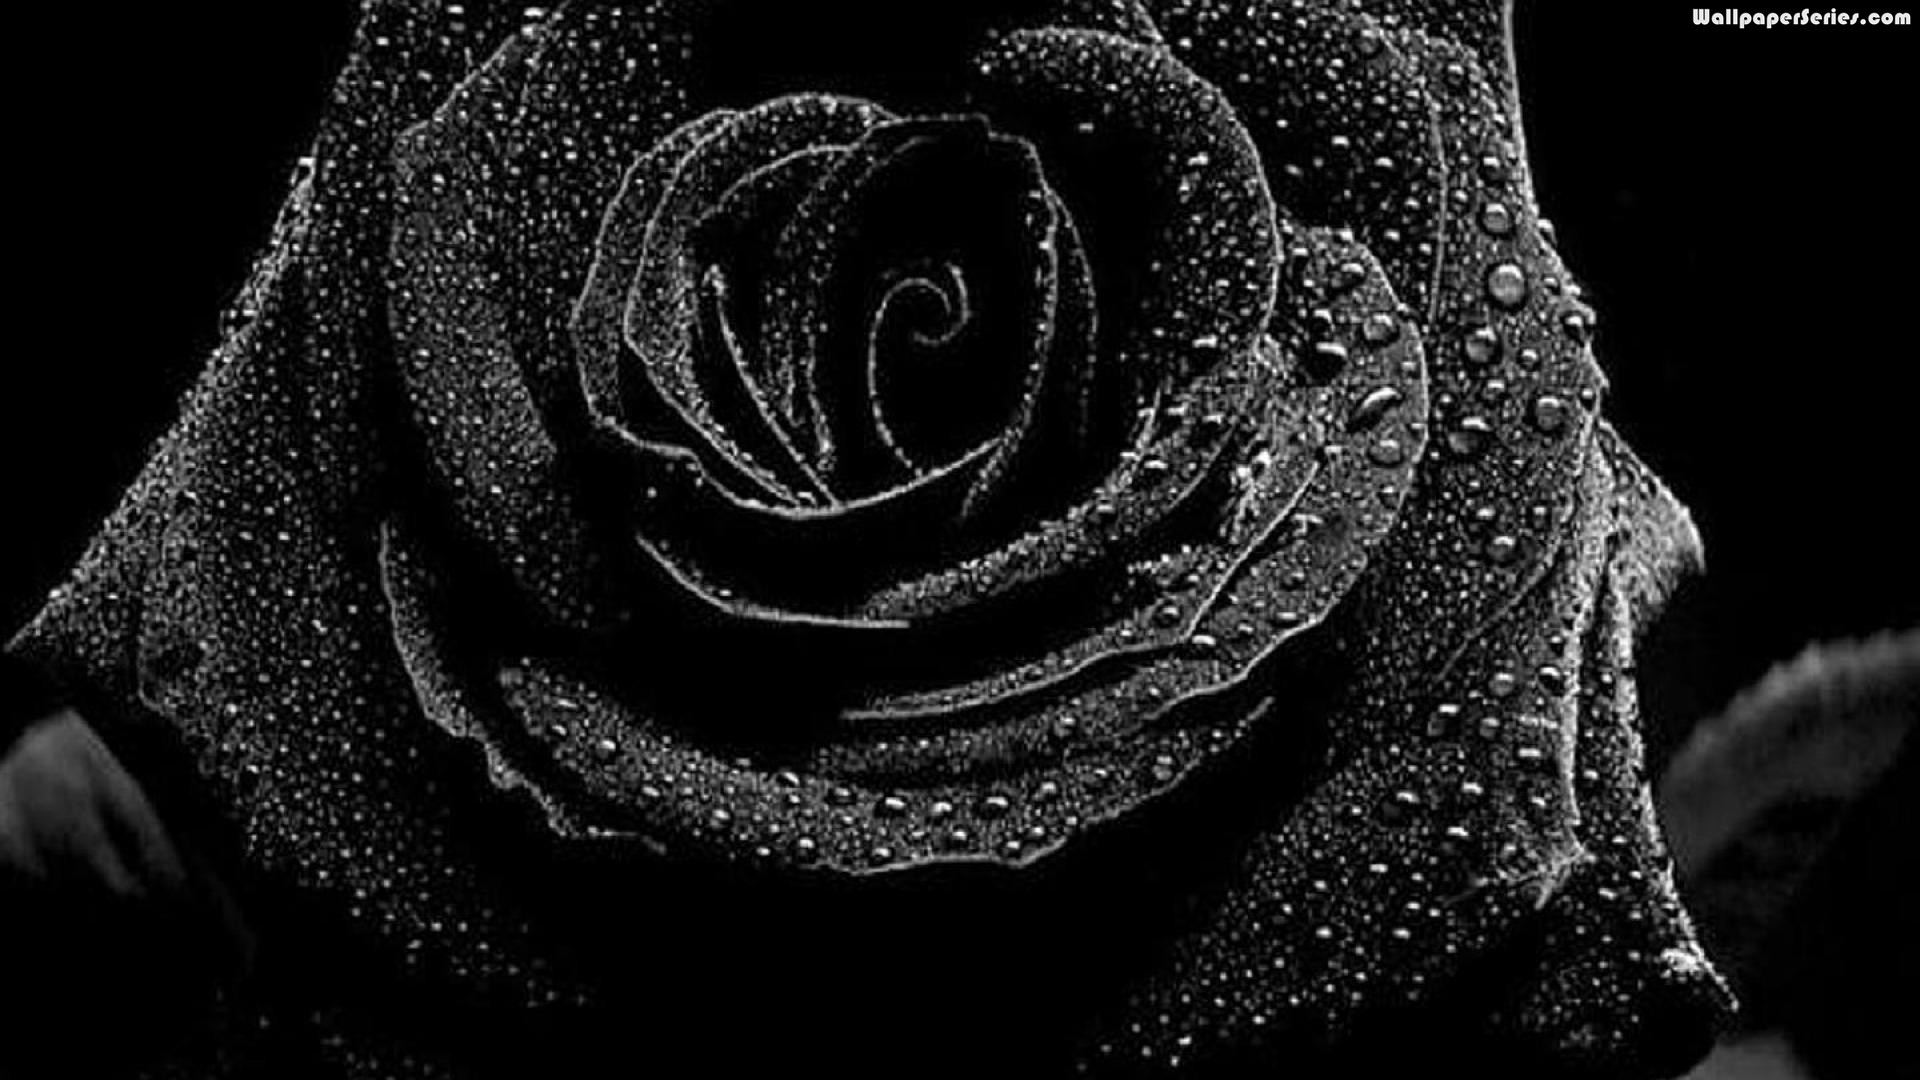 🔥 Download Gallery For Black Rose Wallpaper Top Hq by @patricky | Black